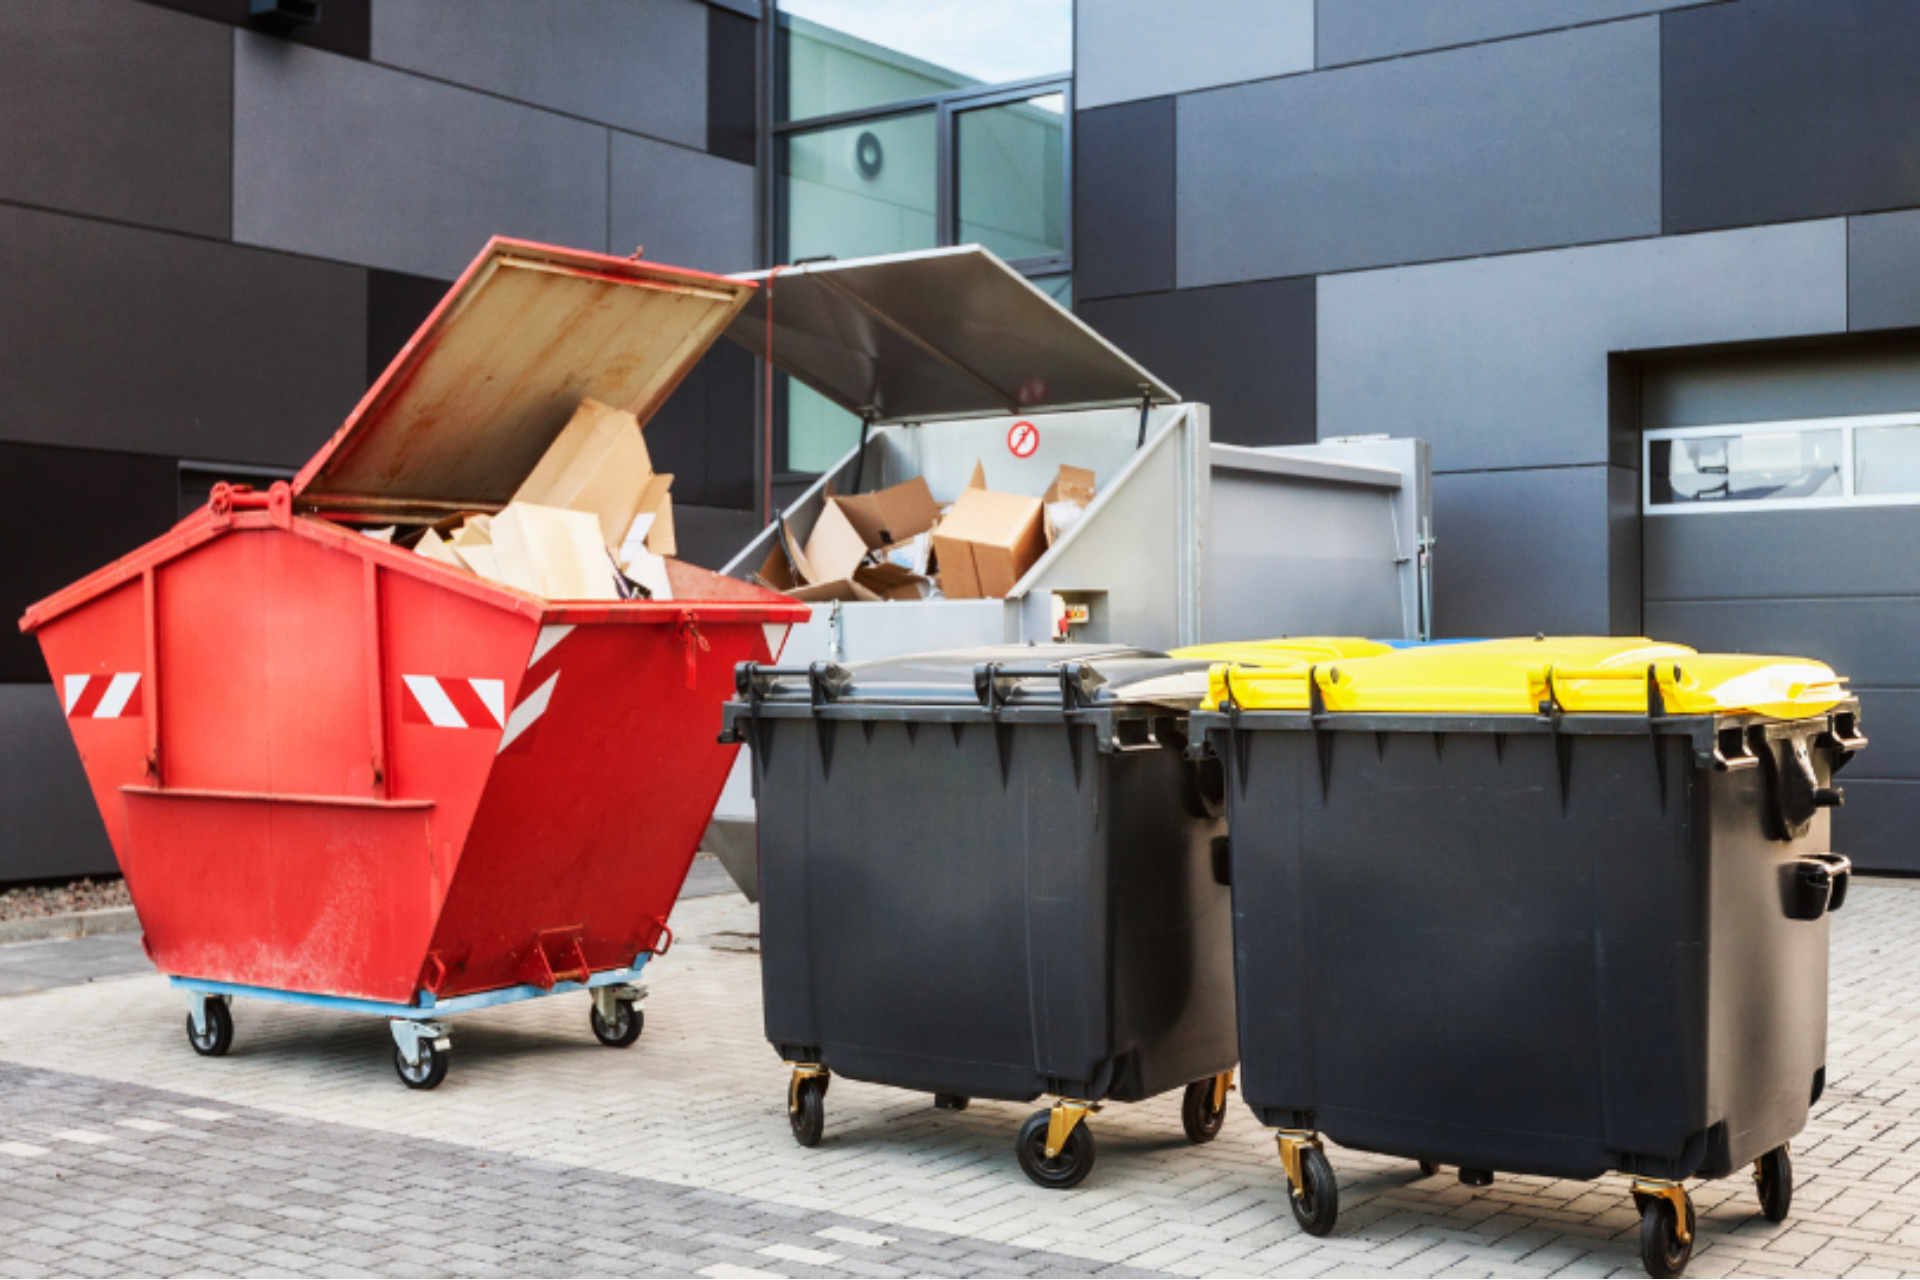 Make Use Of Skip Hire Services To Save Money